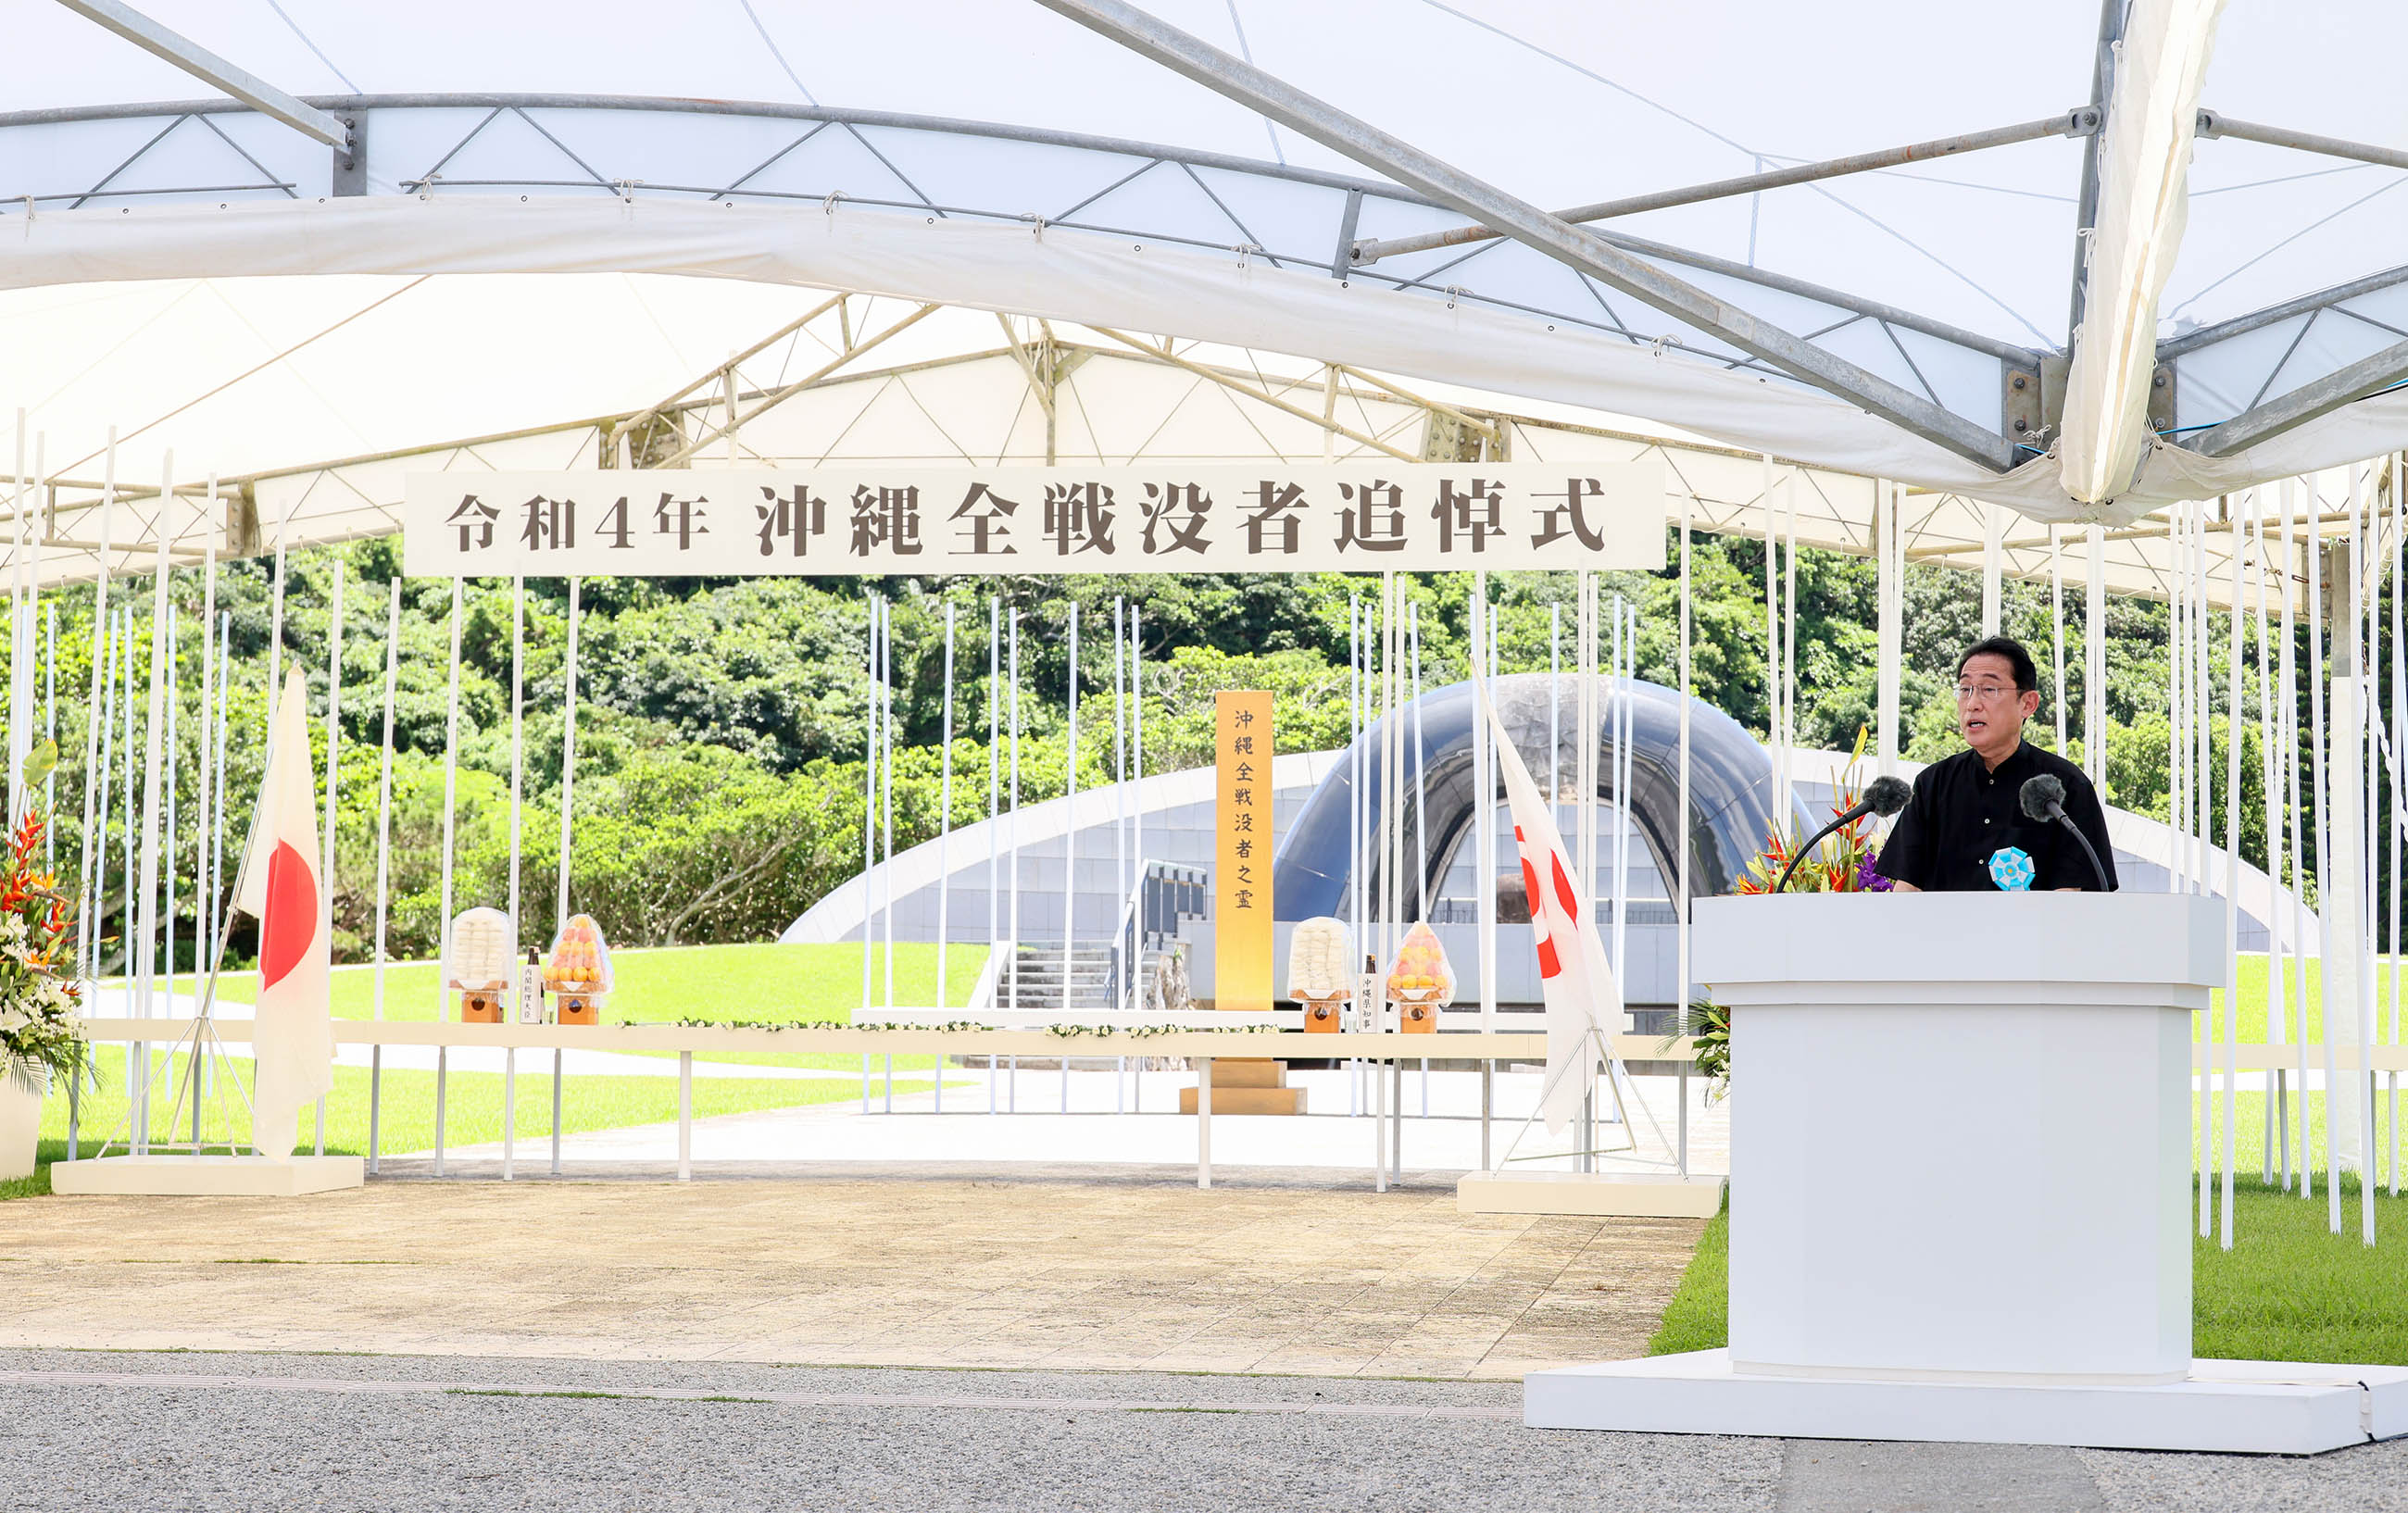 Memorial Ceremony to Commemorate the Fallen on the 77th Anniversary of the End of the Battle of Okinawa